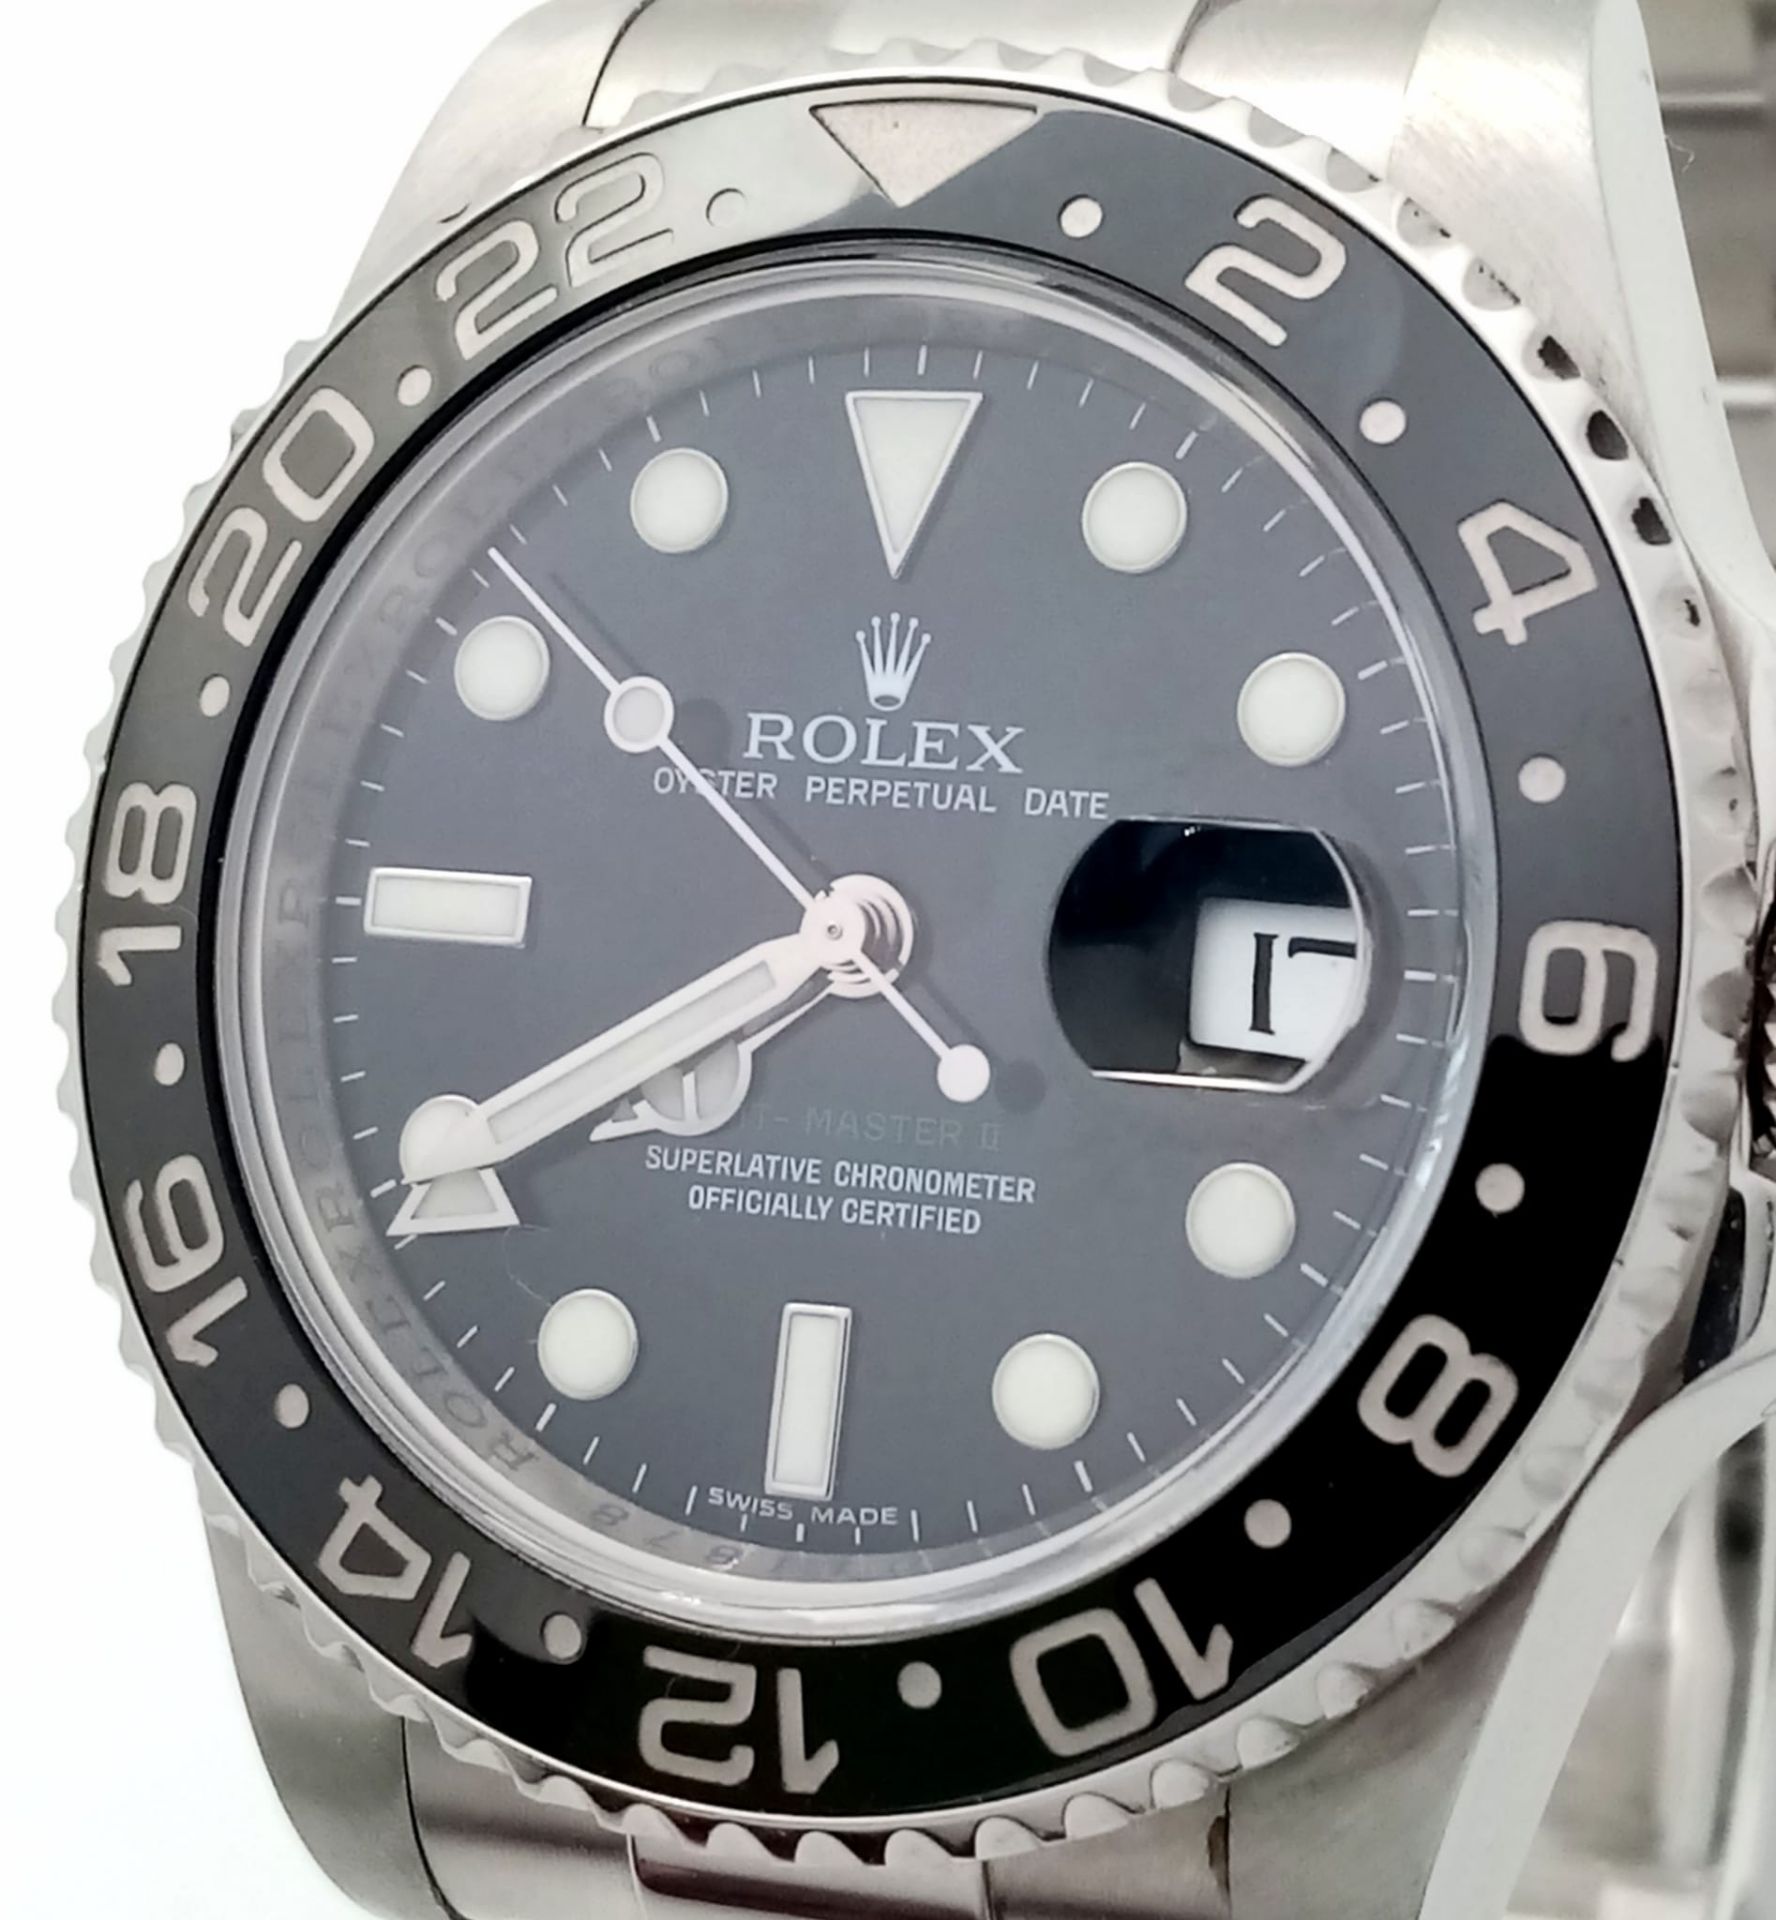 A Rolex GMT-Master II Oyster Perpetual Date Gents Watch. Model - 116710LN. Stainless steel - Image 4 of 12